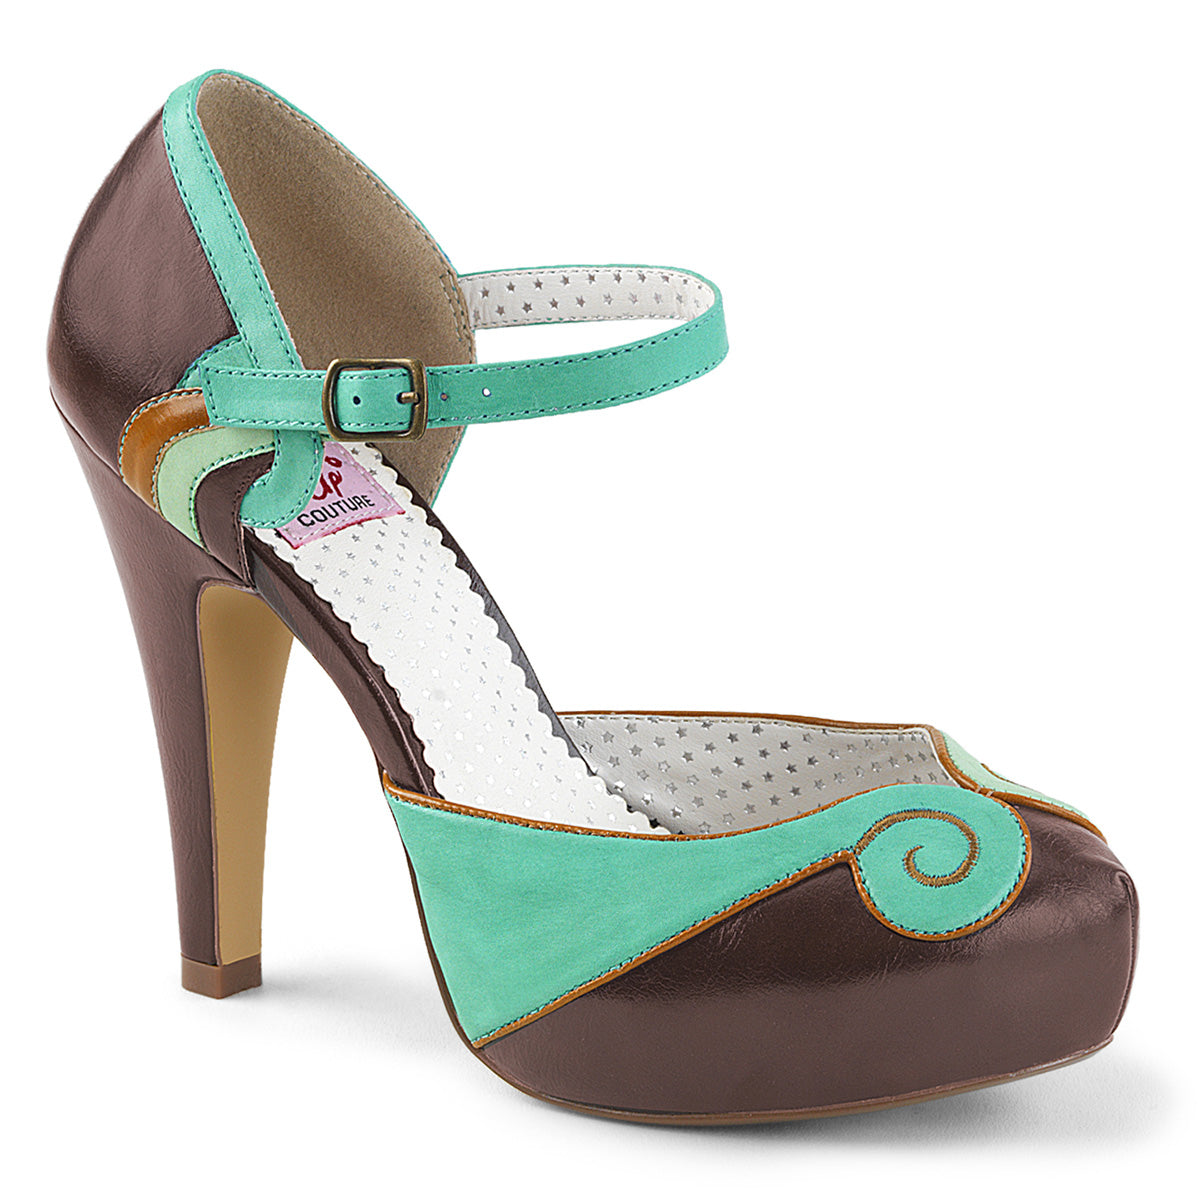 Pin Up Couture Womens Pumps BETTIE-17 Teal-Brown Faux Leather